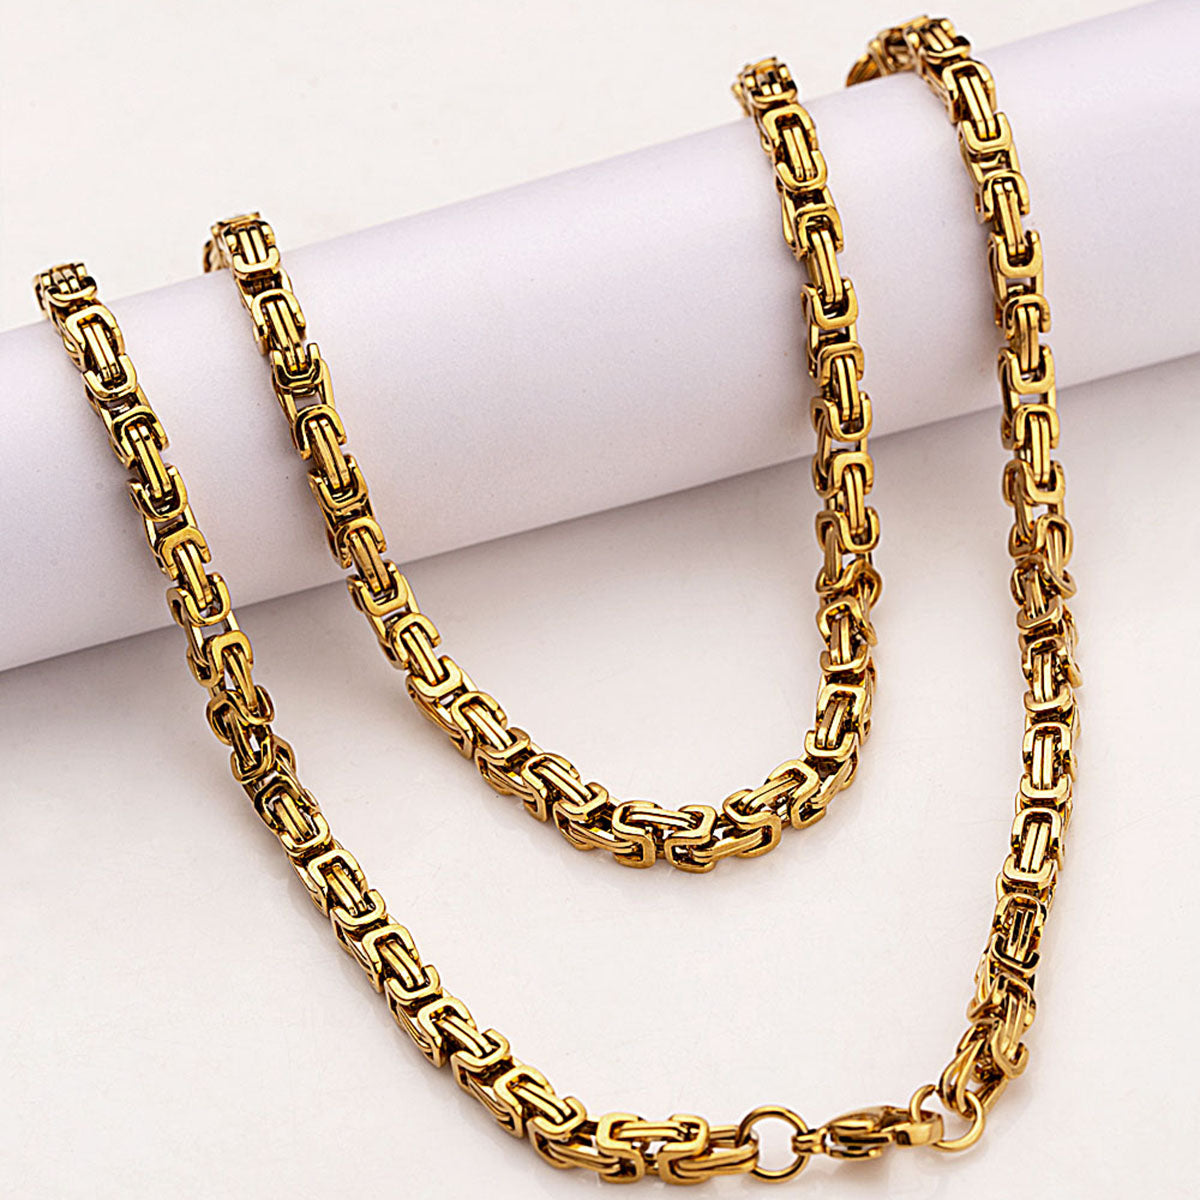 Royal Links Classic Link Pattern Chain